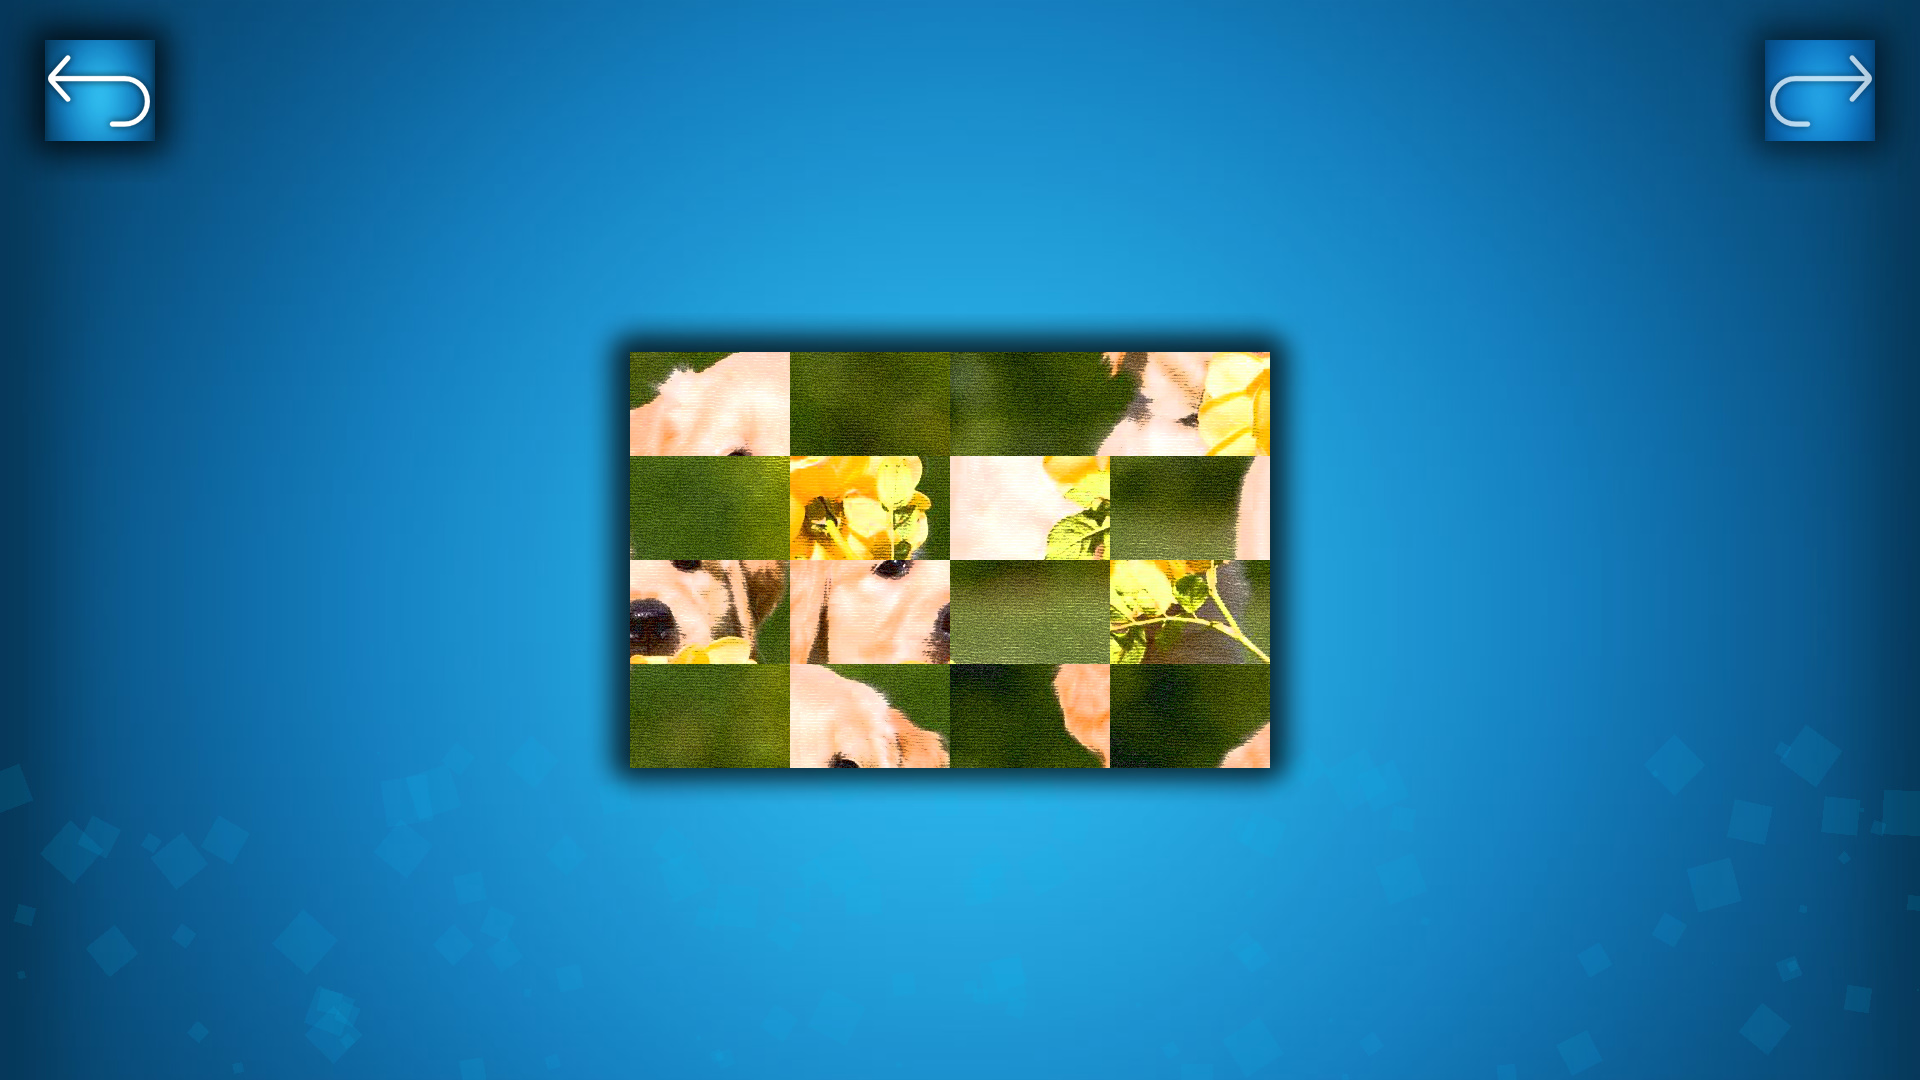 PUZZLE: CATS & DOGS - Puzzle Pack: Summer Dogs Featured Screenshot #1